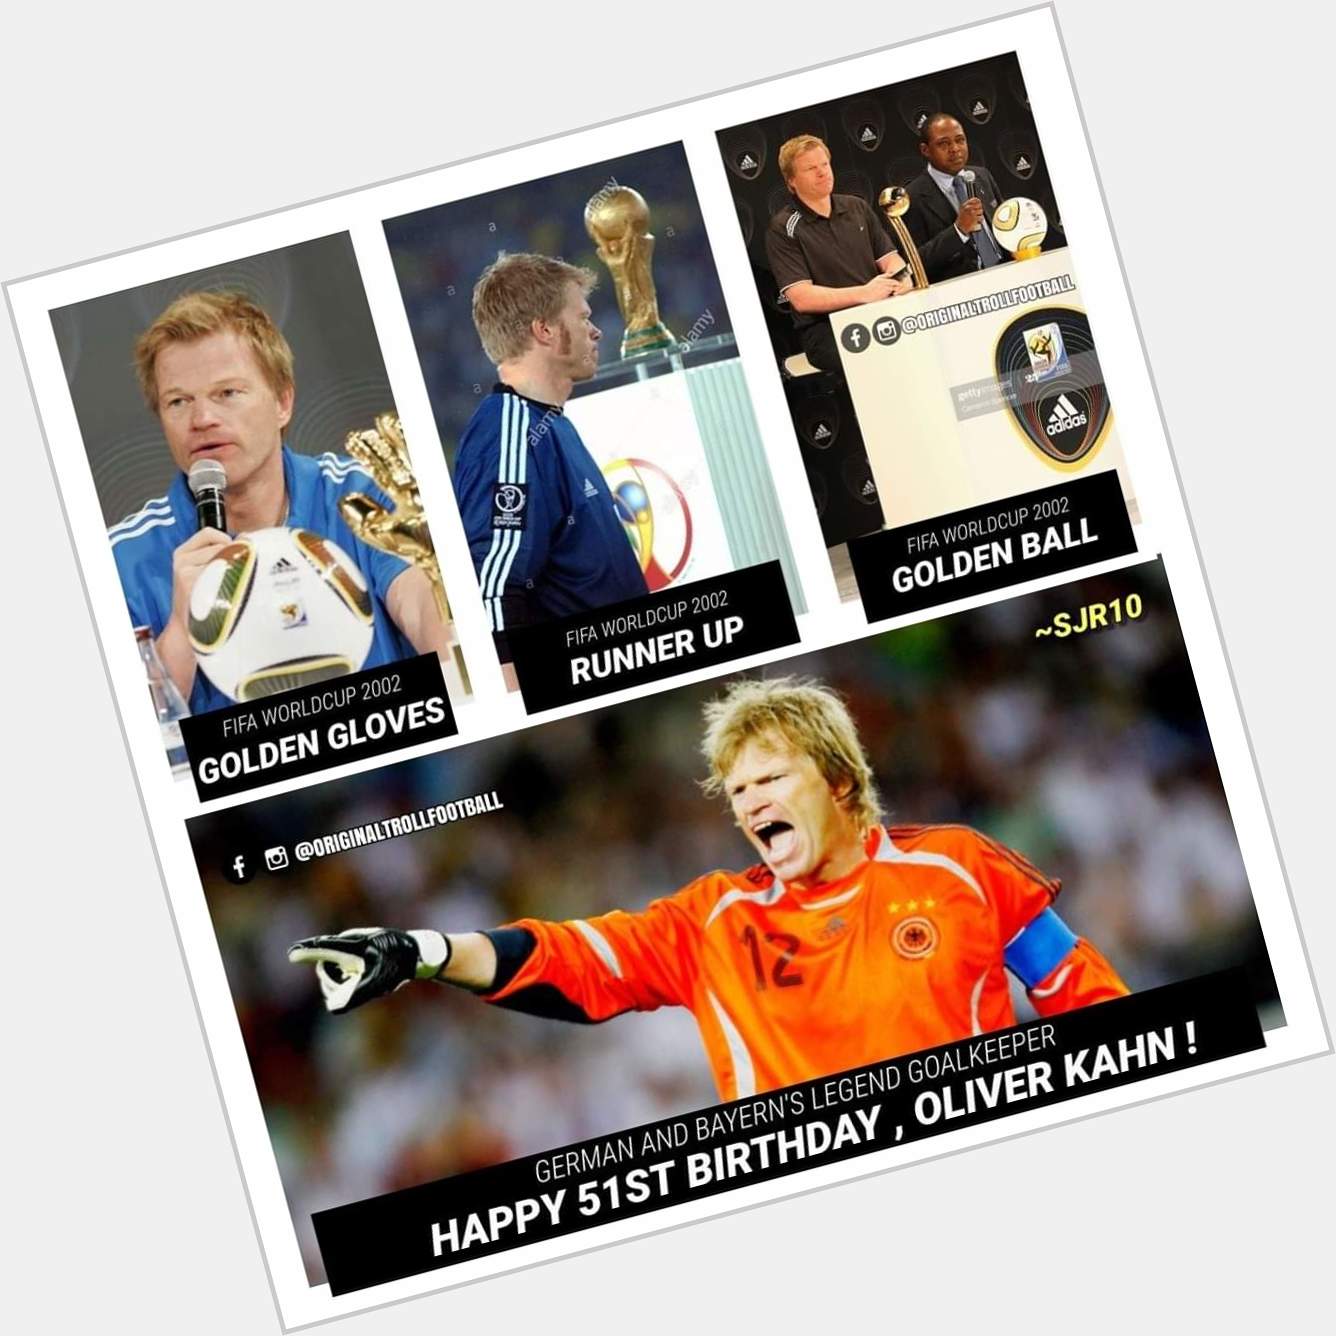 Oliver saves a can. Does that he is Oliver Kahn

Happy Birthday legend  